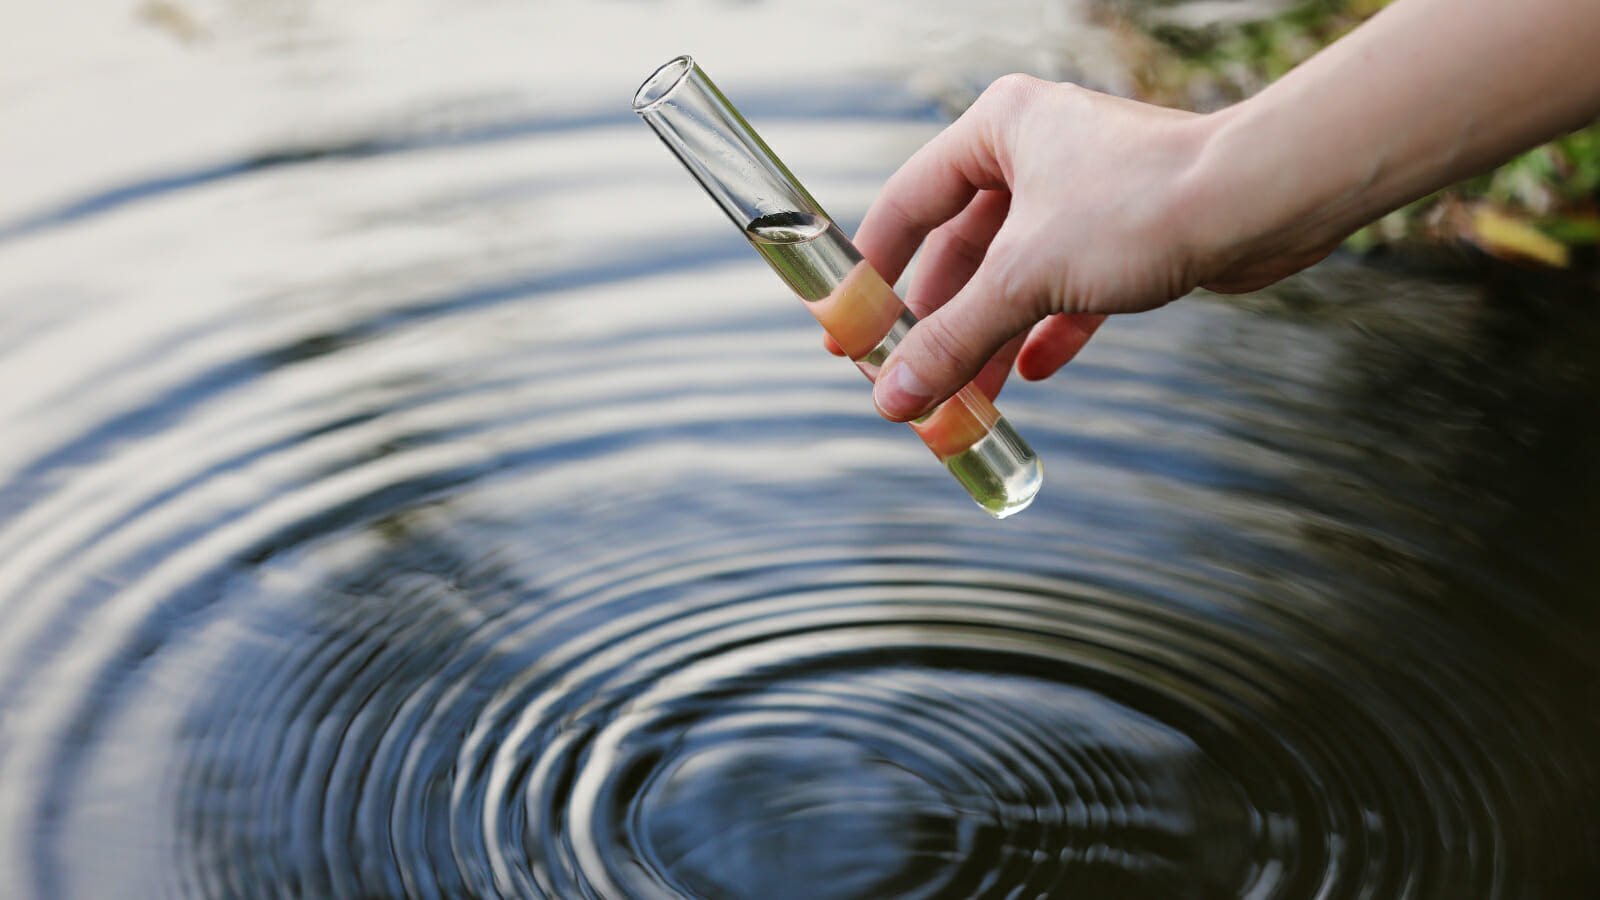 Hand holding a clear water sample, symbolizing the analysis of water purity in Rockwall, TX, for 2023. The concept emphasizes the importance of testing water for contaminants to ensure public health and safety.